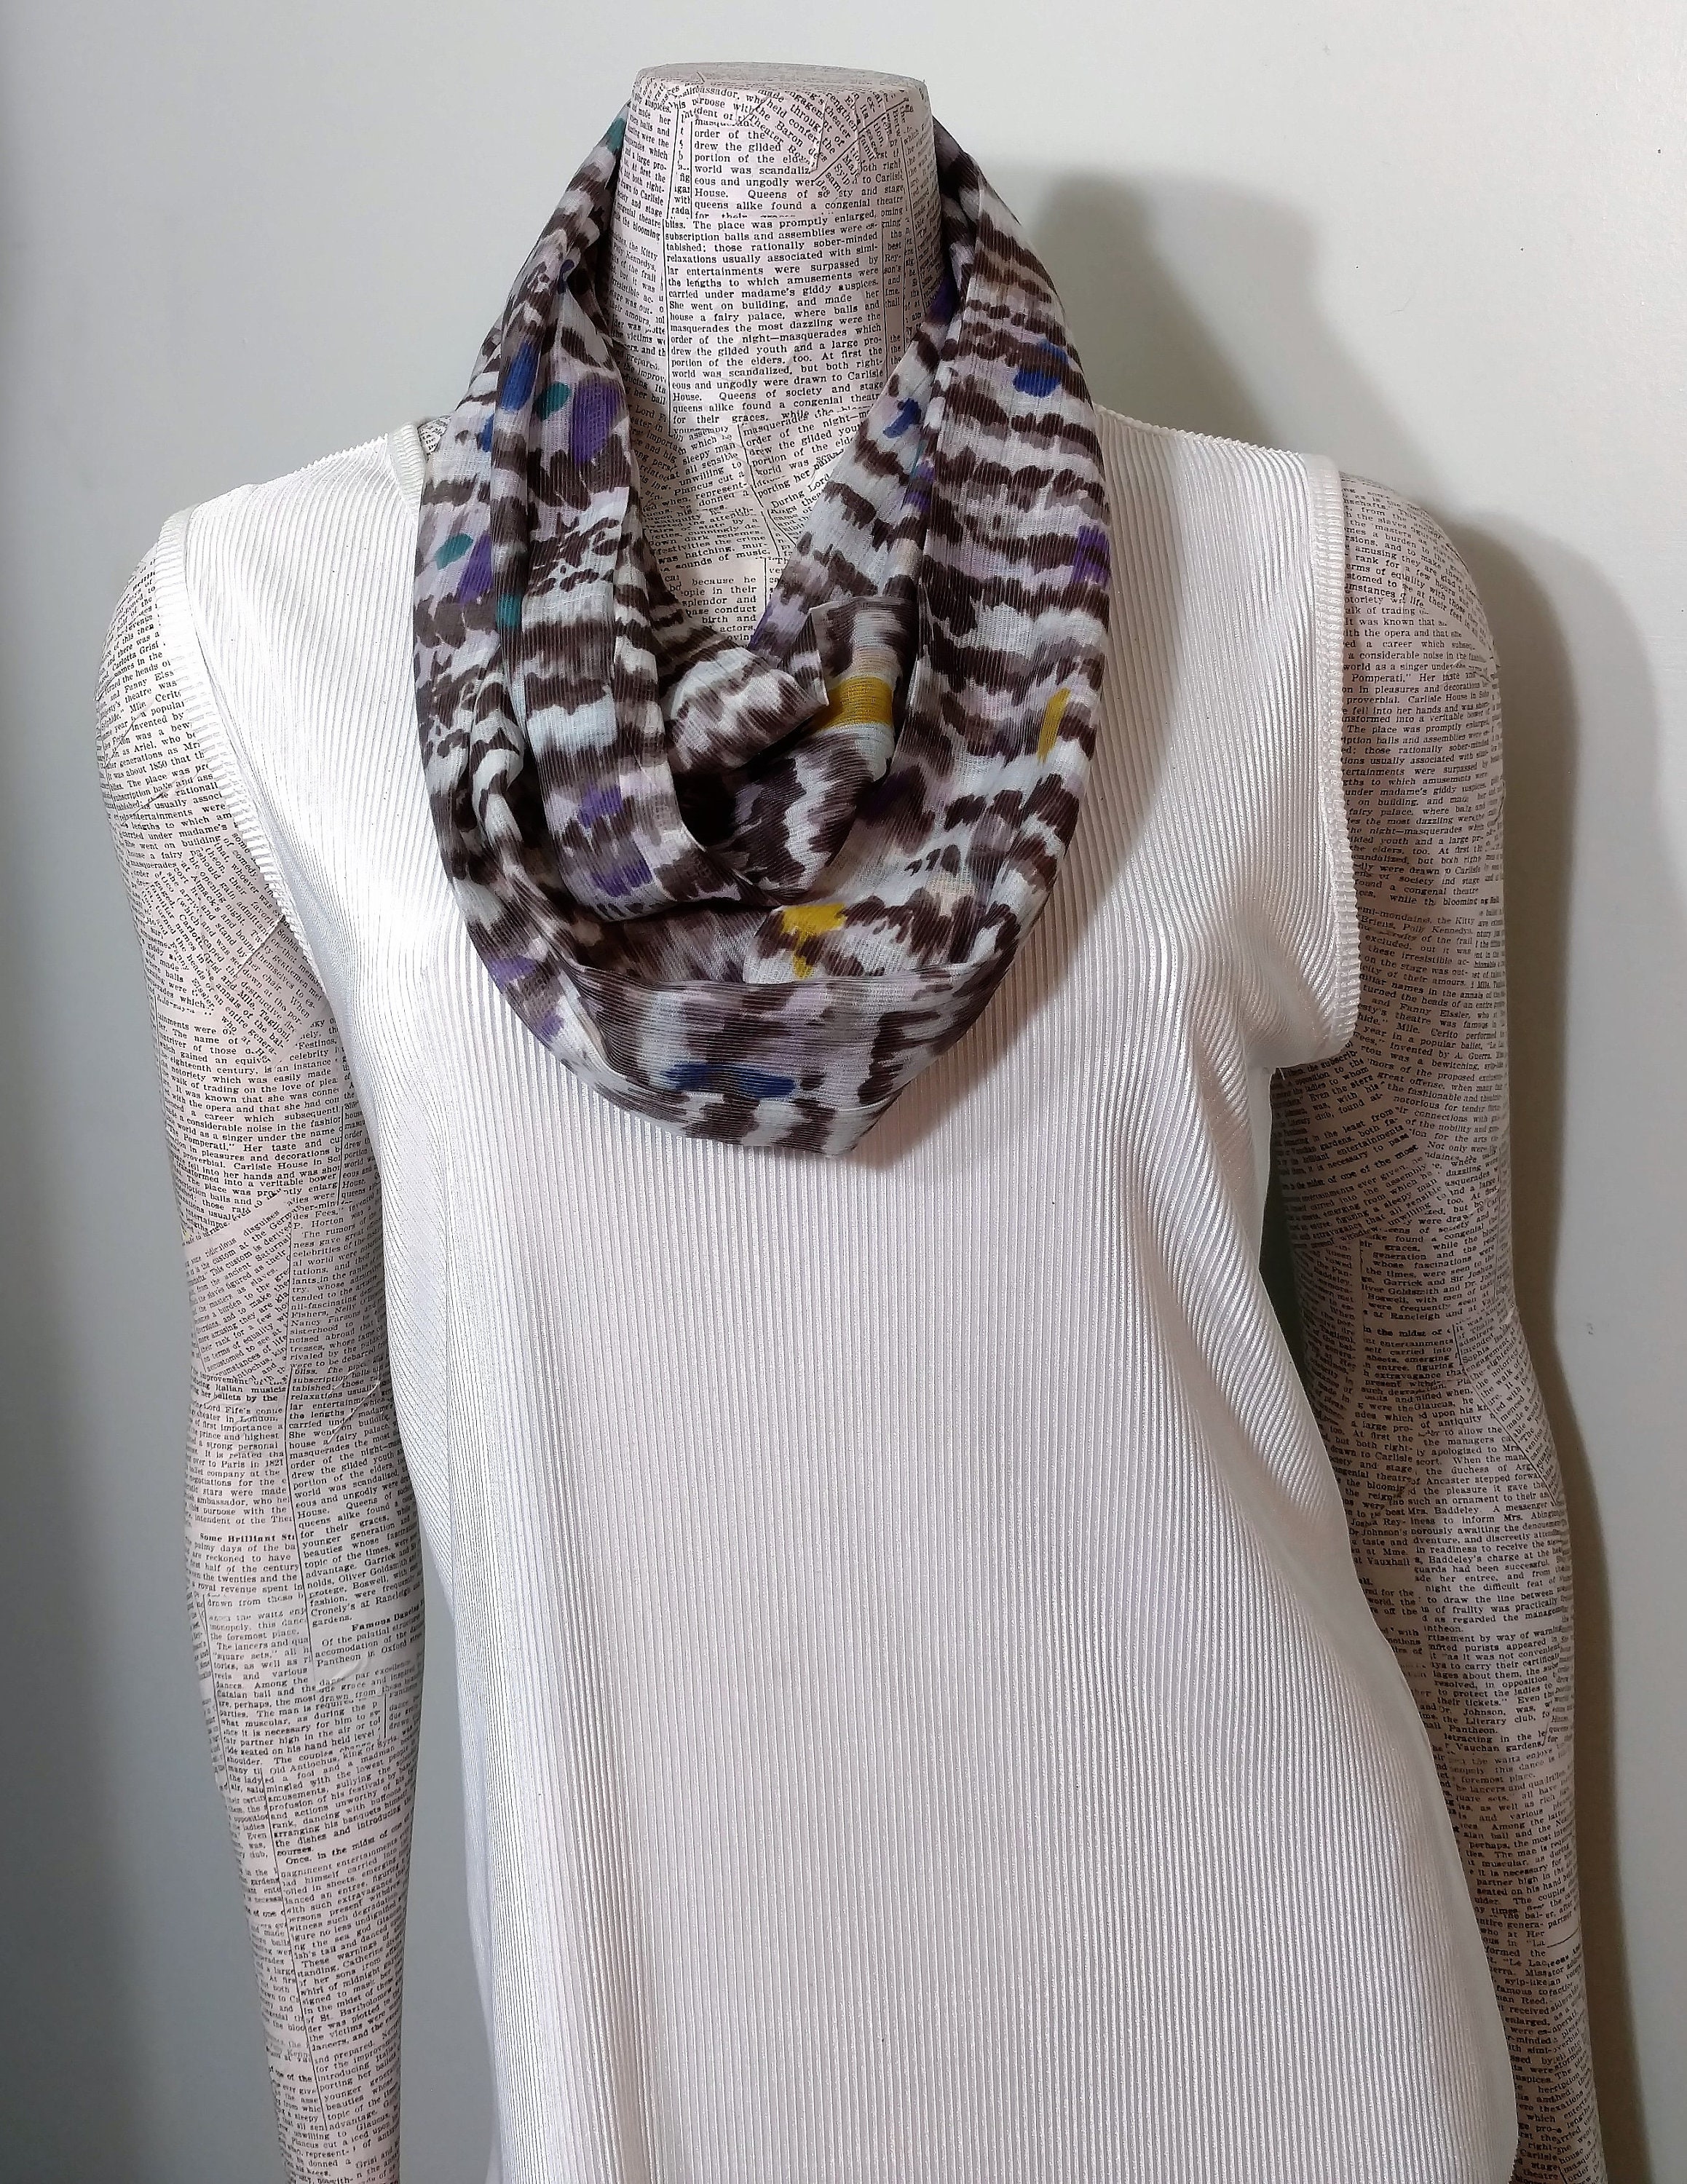 Southwestern Casual sporty look.* Soft full drape Aztec Abstract orange brown black and white design on a rayon ladies infinity scarf